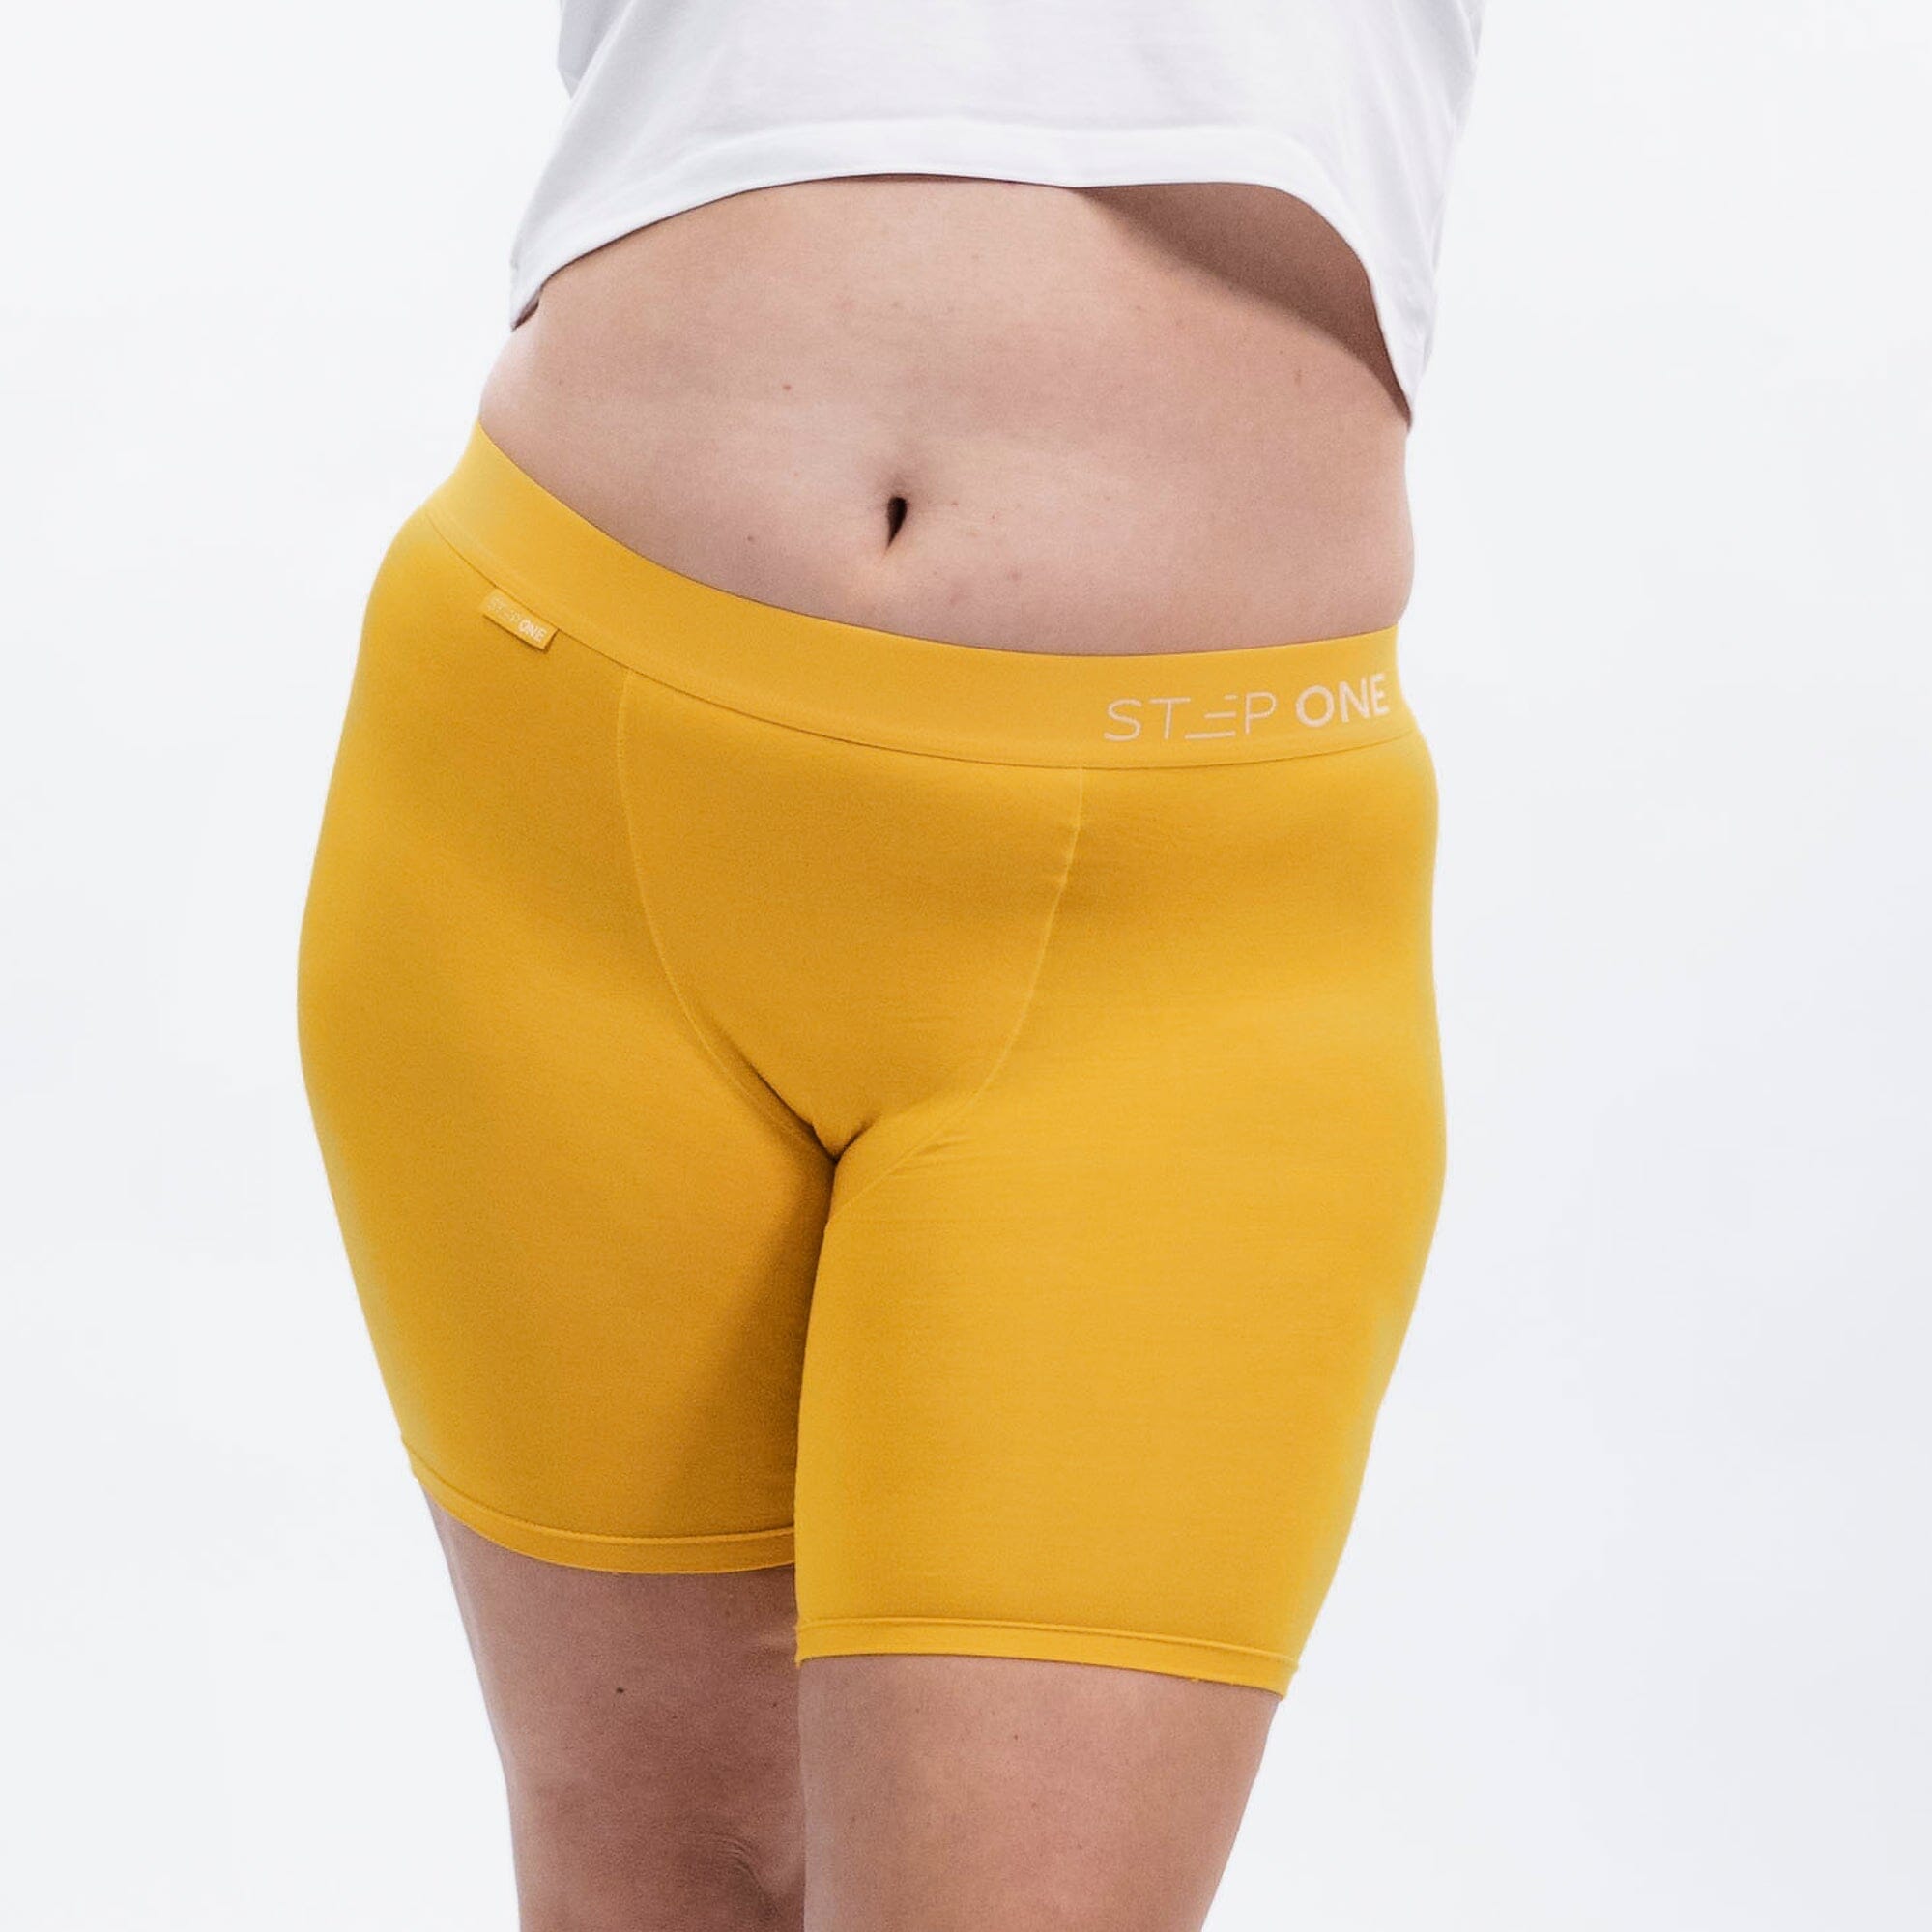 Women's Boxer Brief - Cheeky Cheddars - Model - #size_4XL